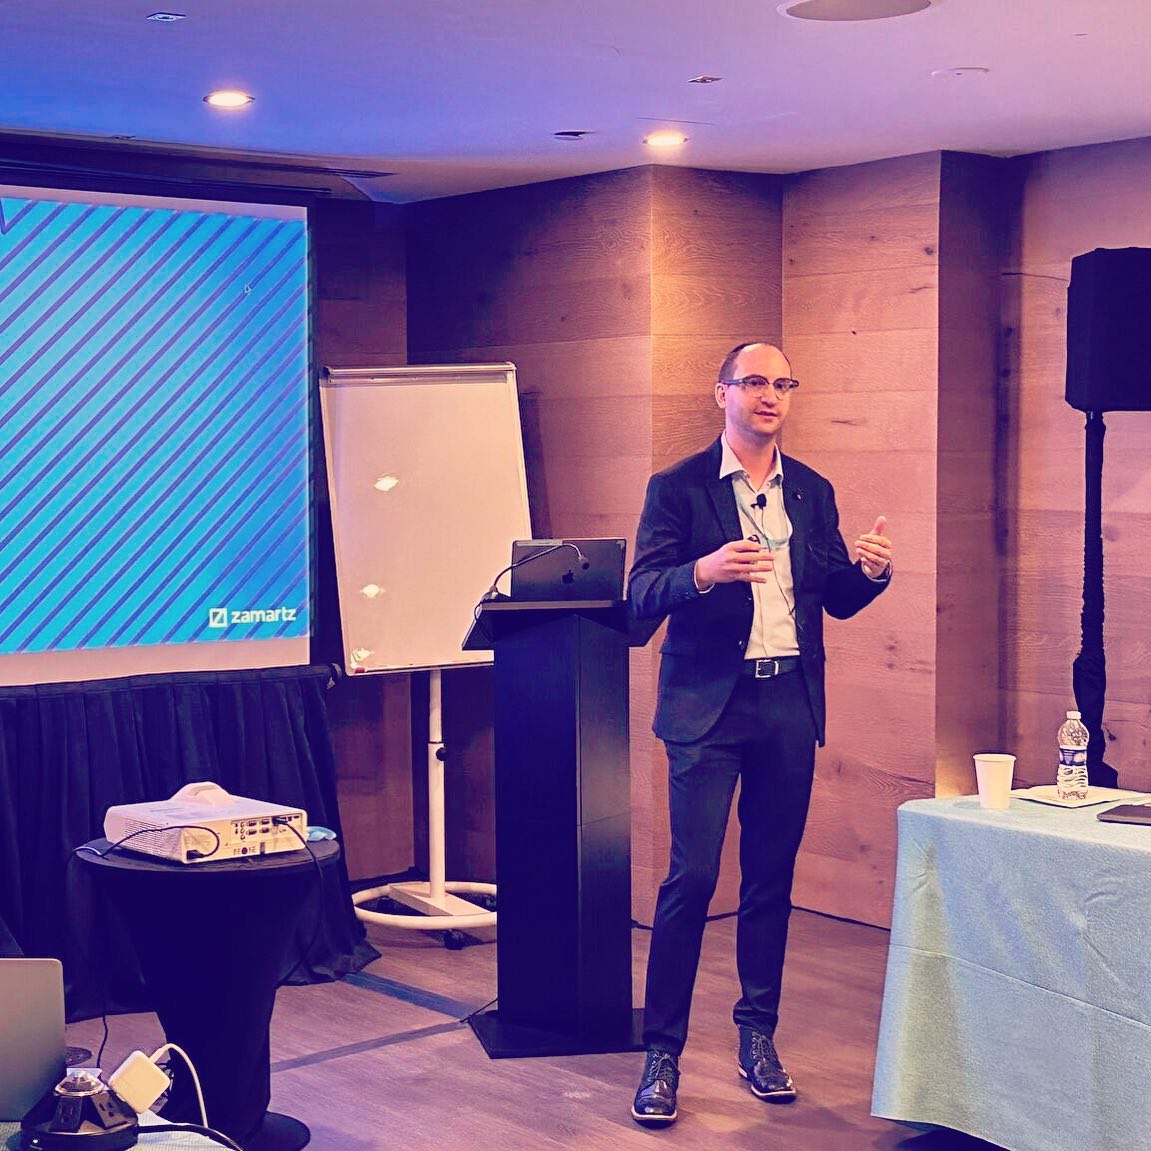 zamartz speaking at Productsup Customer Connect event in NYC